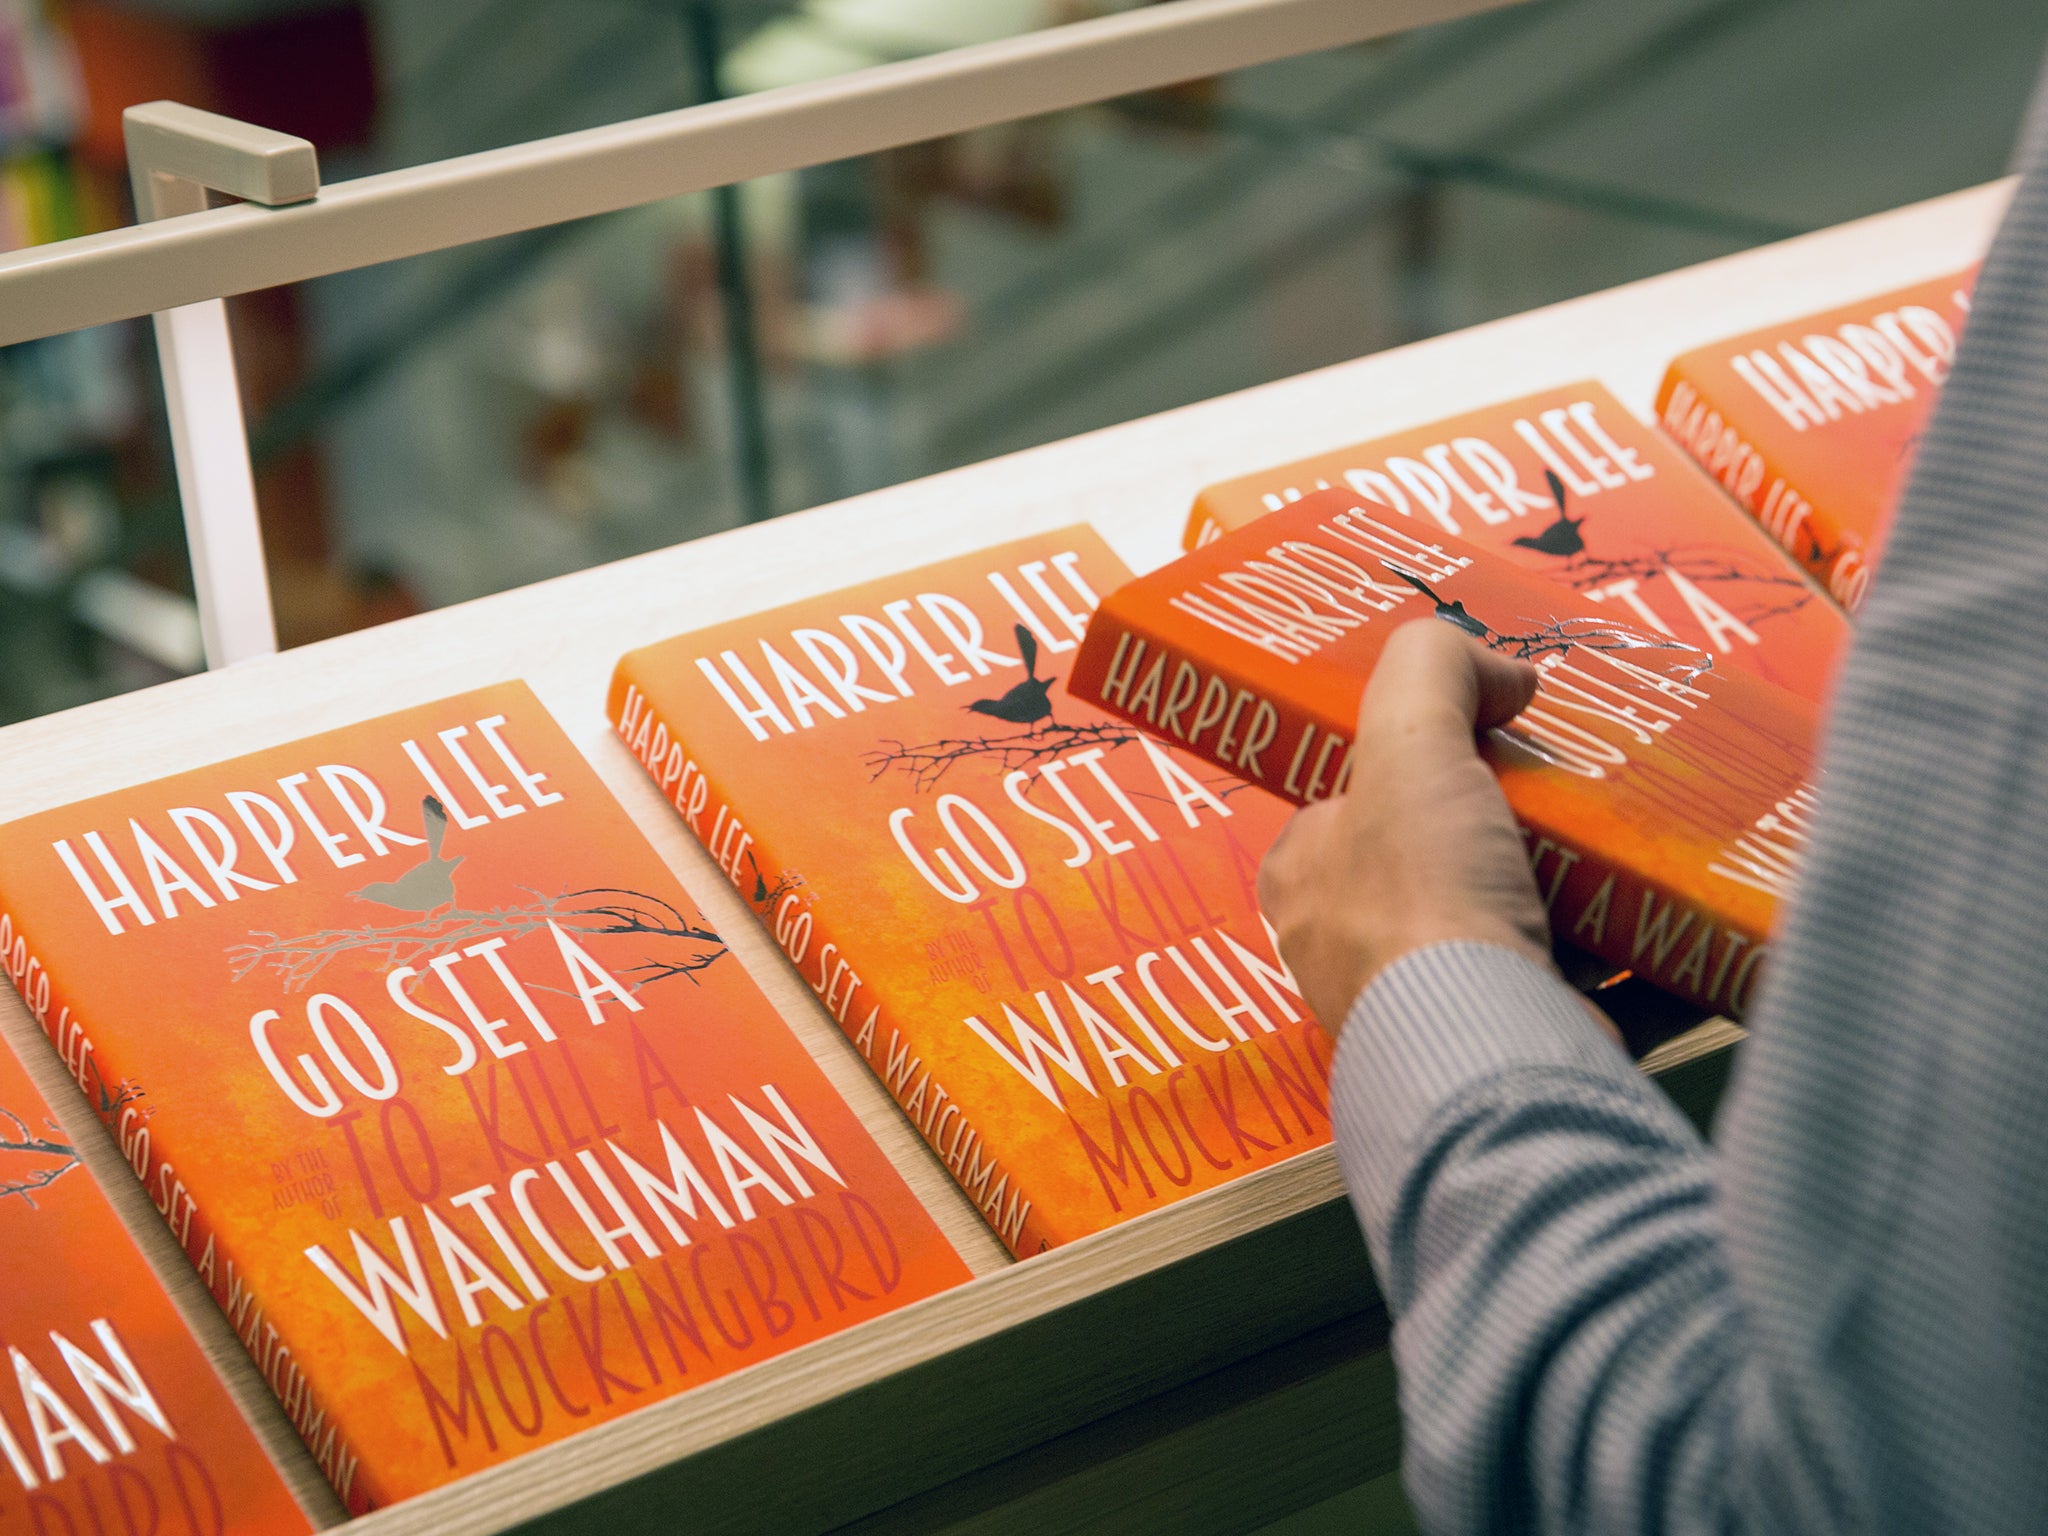 Staff at Foyles book shop prepare to sell copies of 'Go Set A Watchman' by Harper Lee